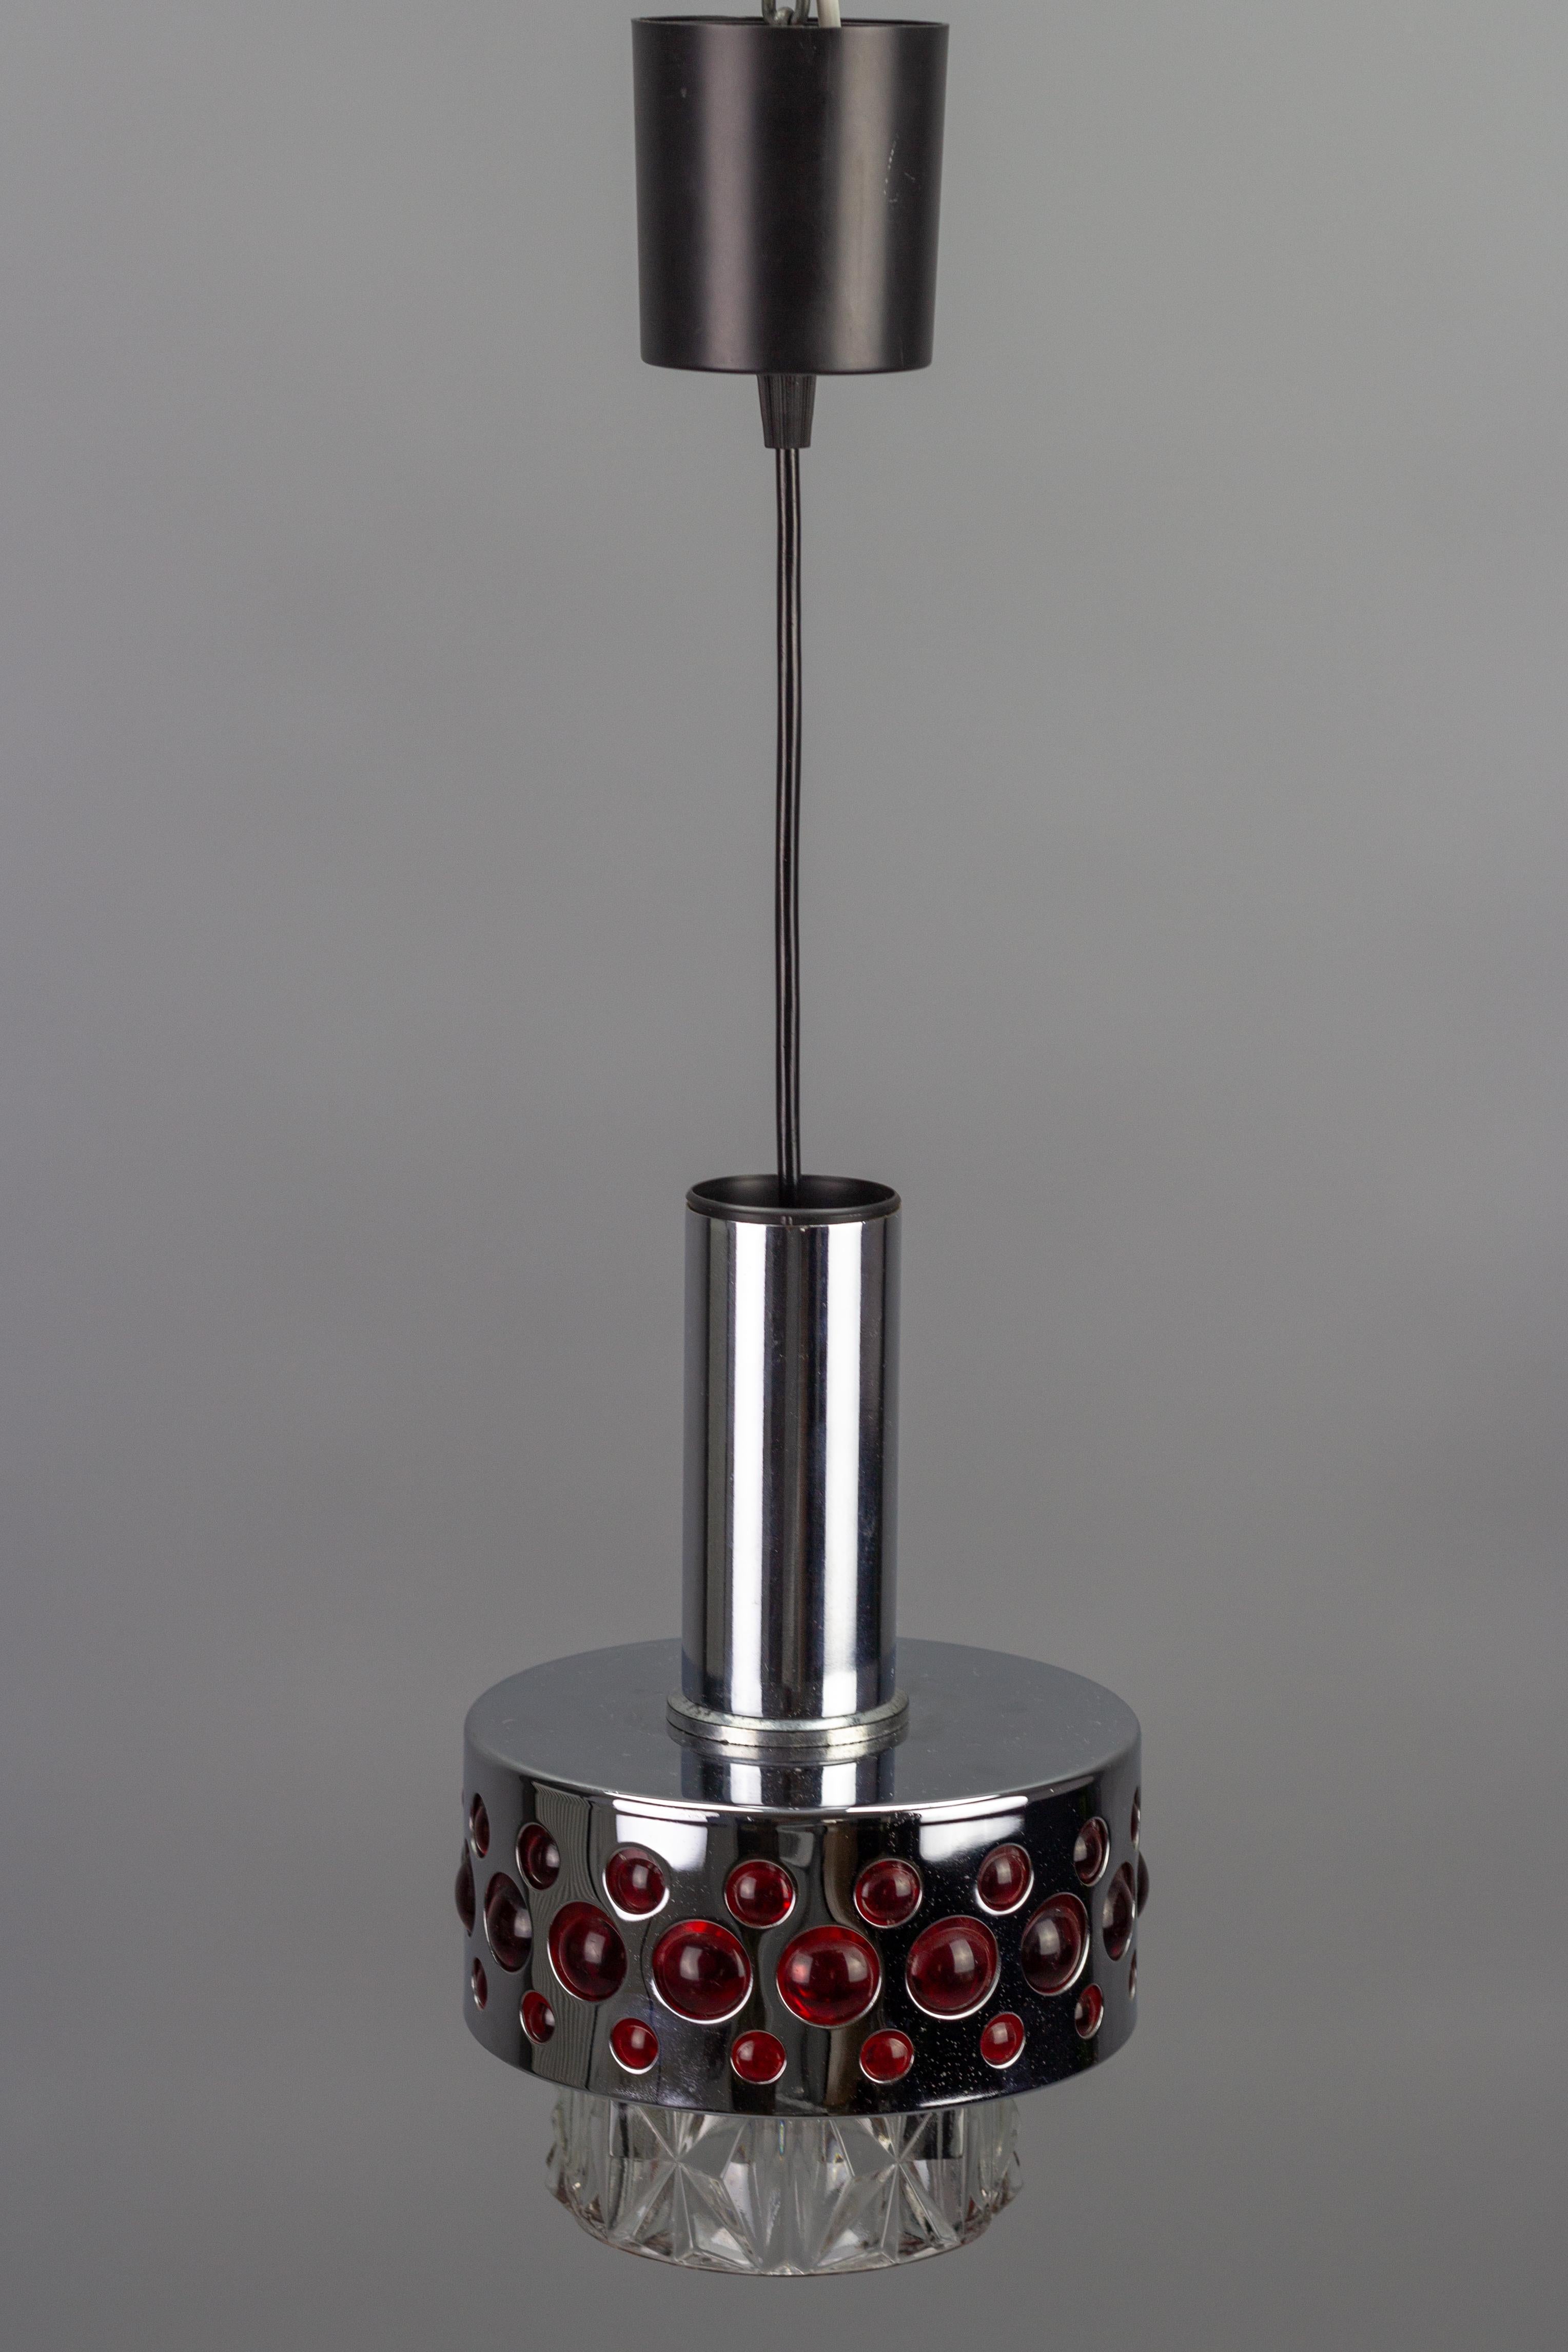 German Mid-Century Modern Chrome and Red Pendant Light by Richard Essig, 1970s For Sale 3